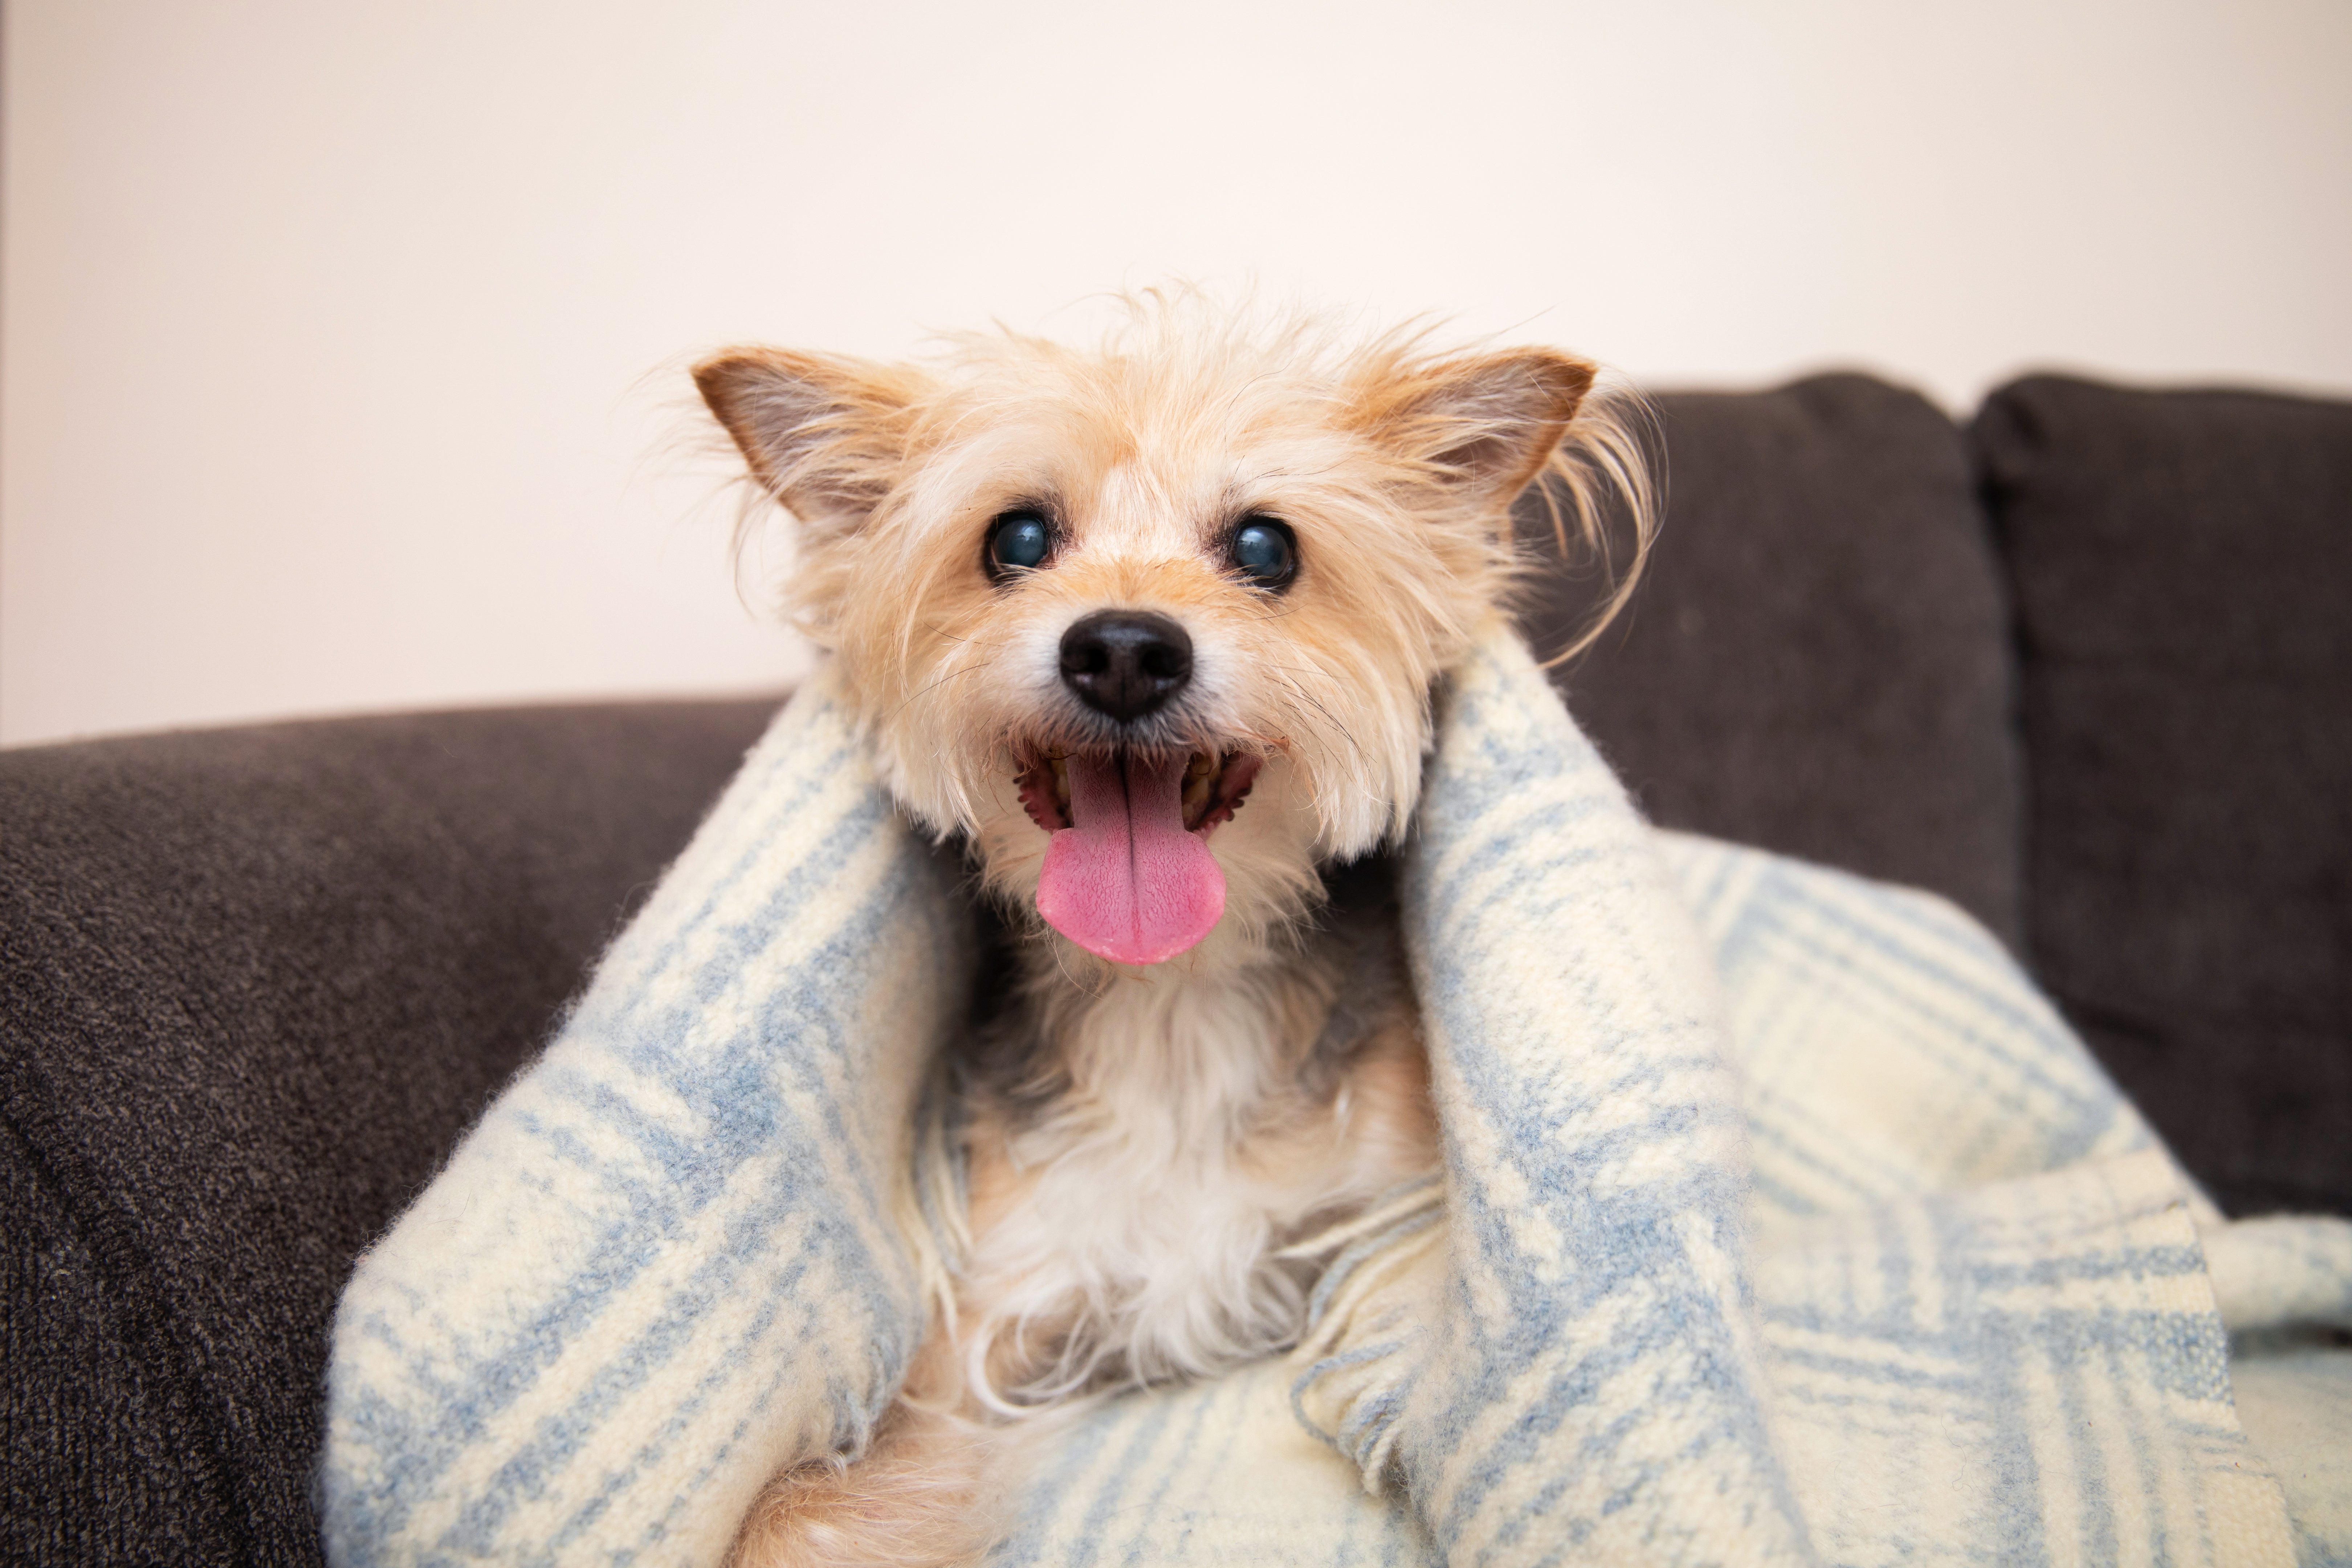 Happy dog on a cozy couch